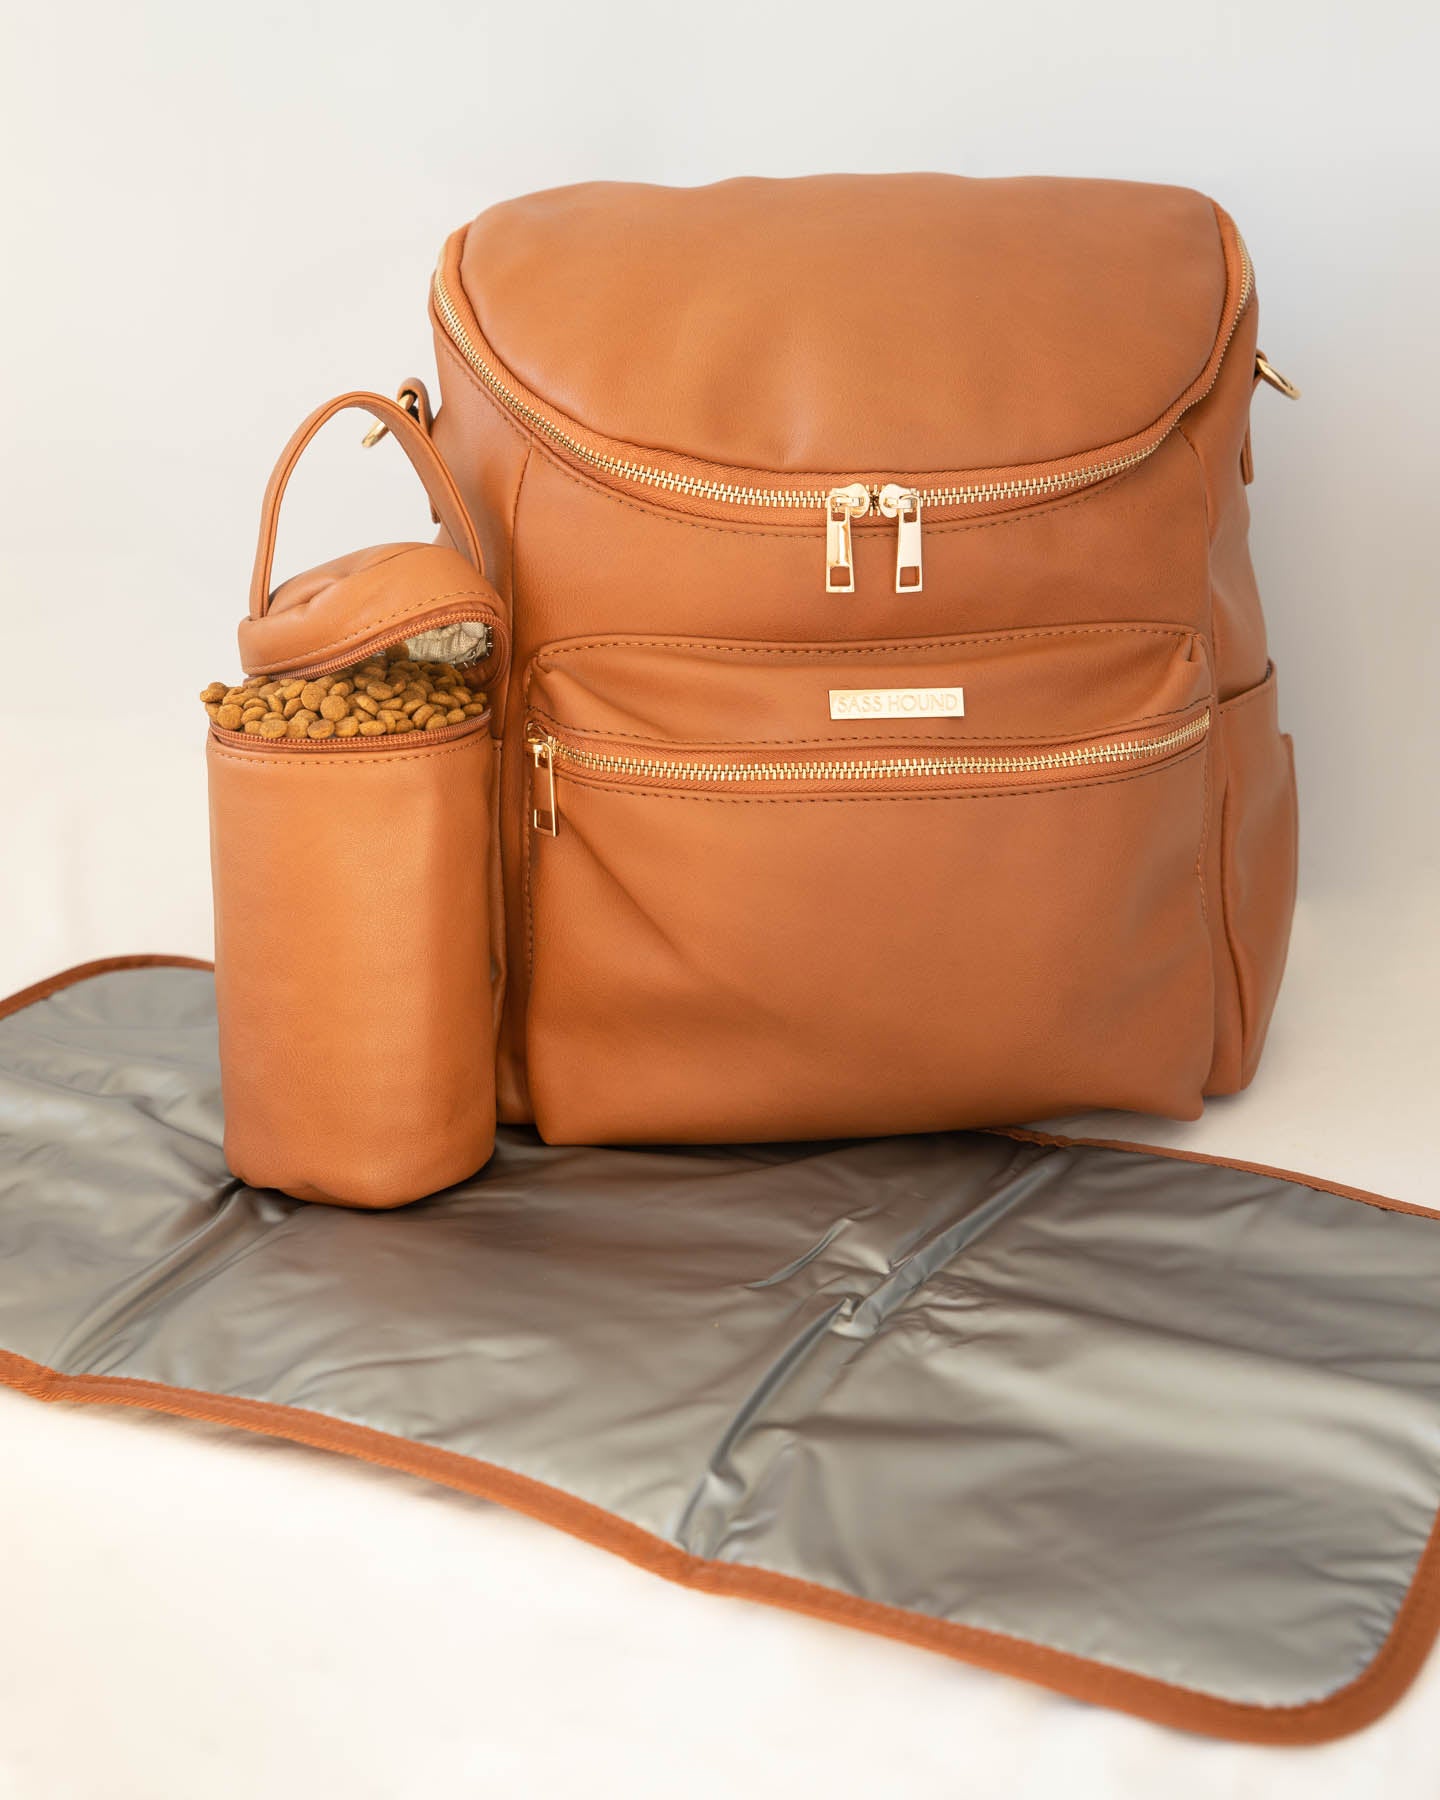 The Luxe Vegan Leather Dog Travel bag